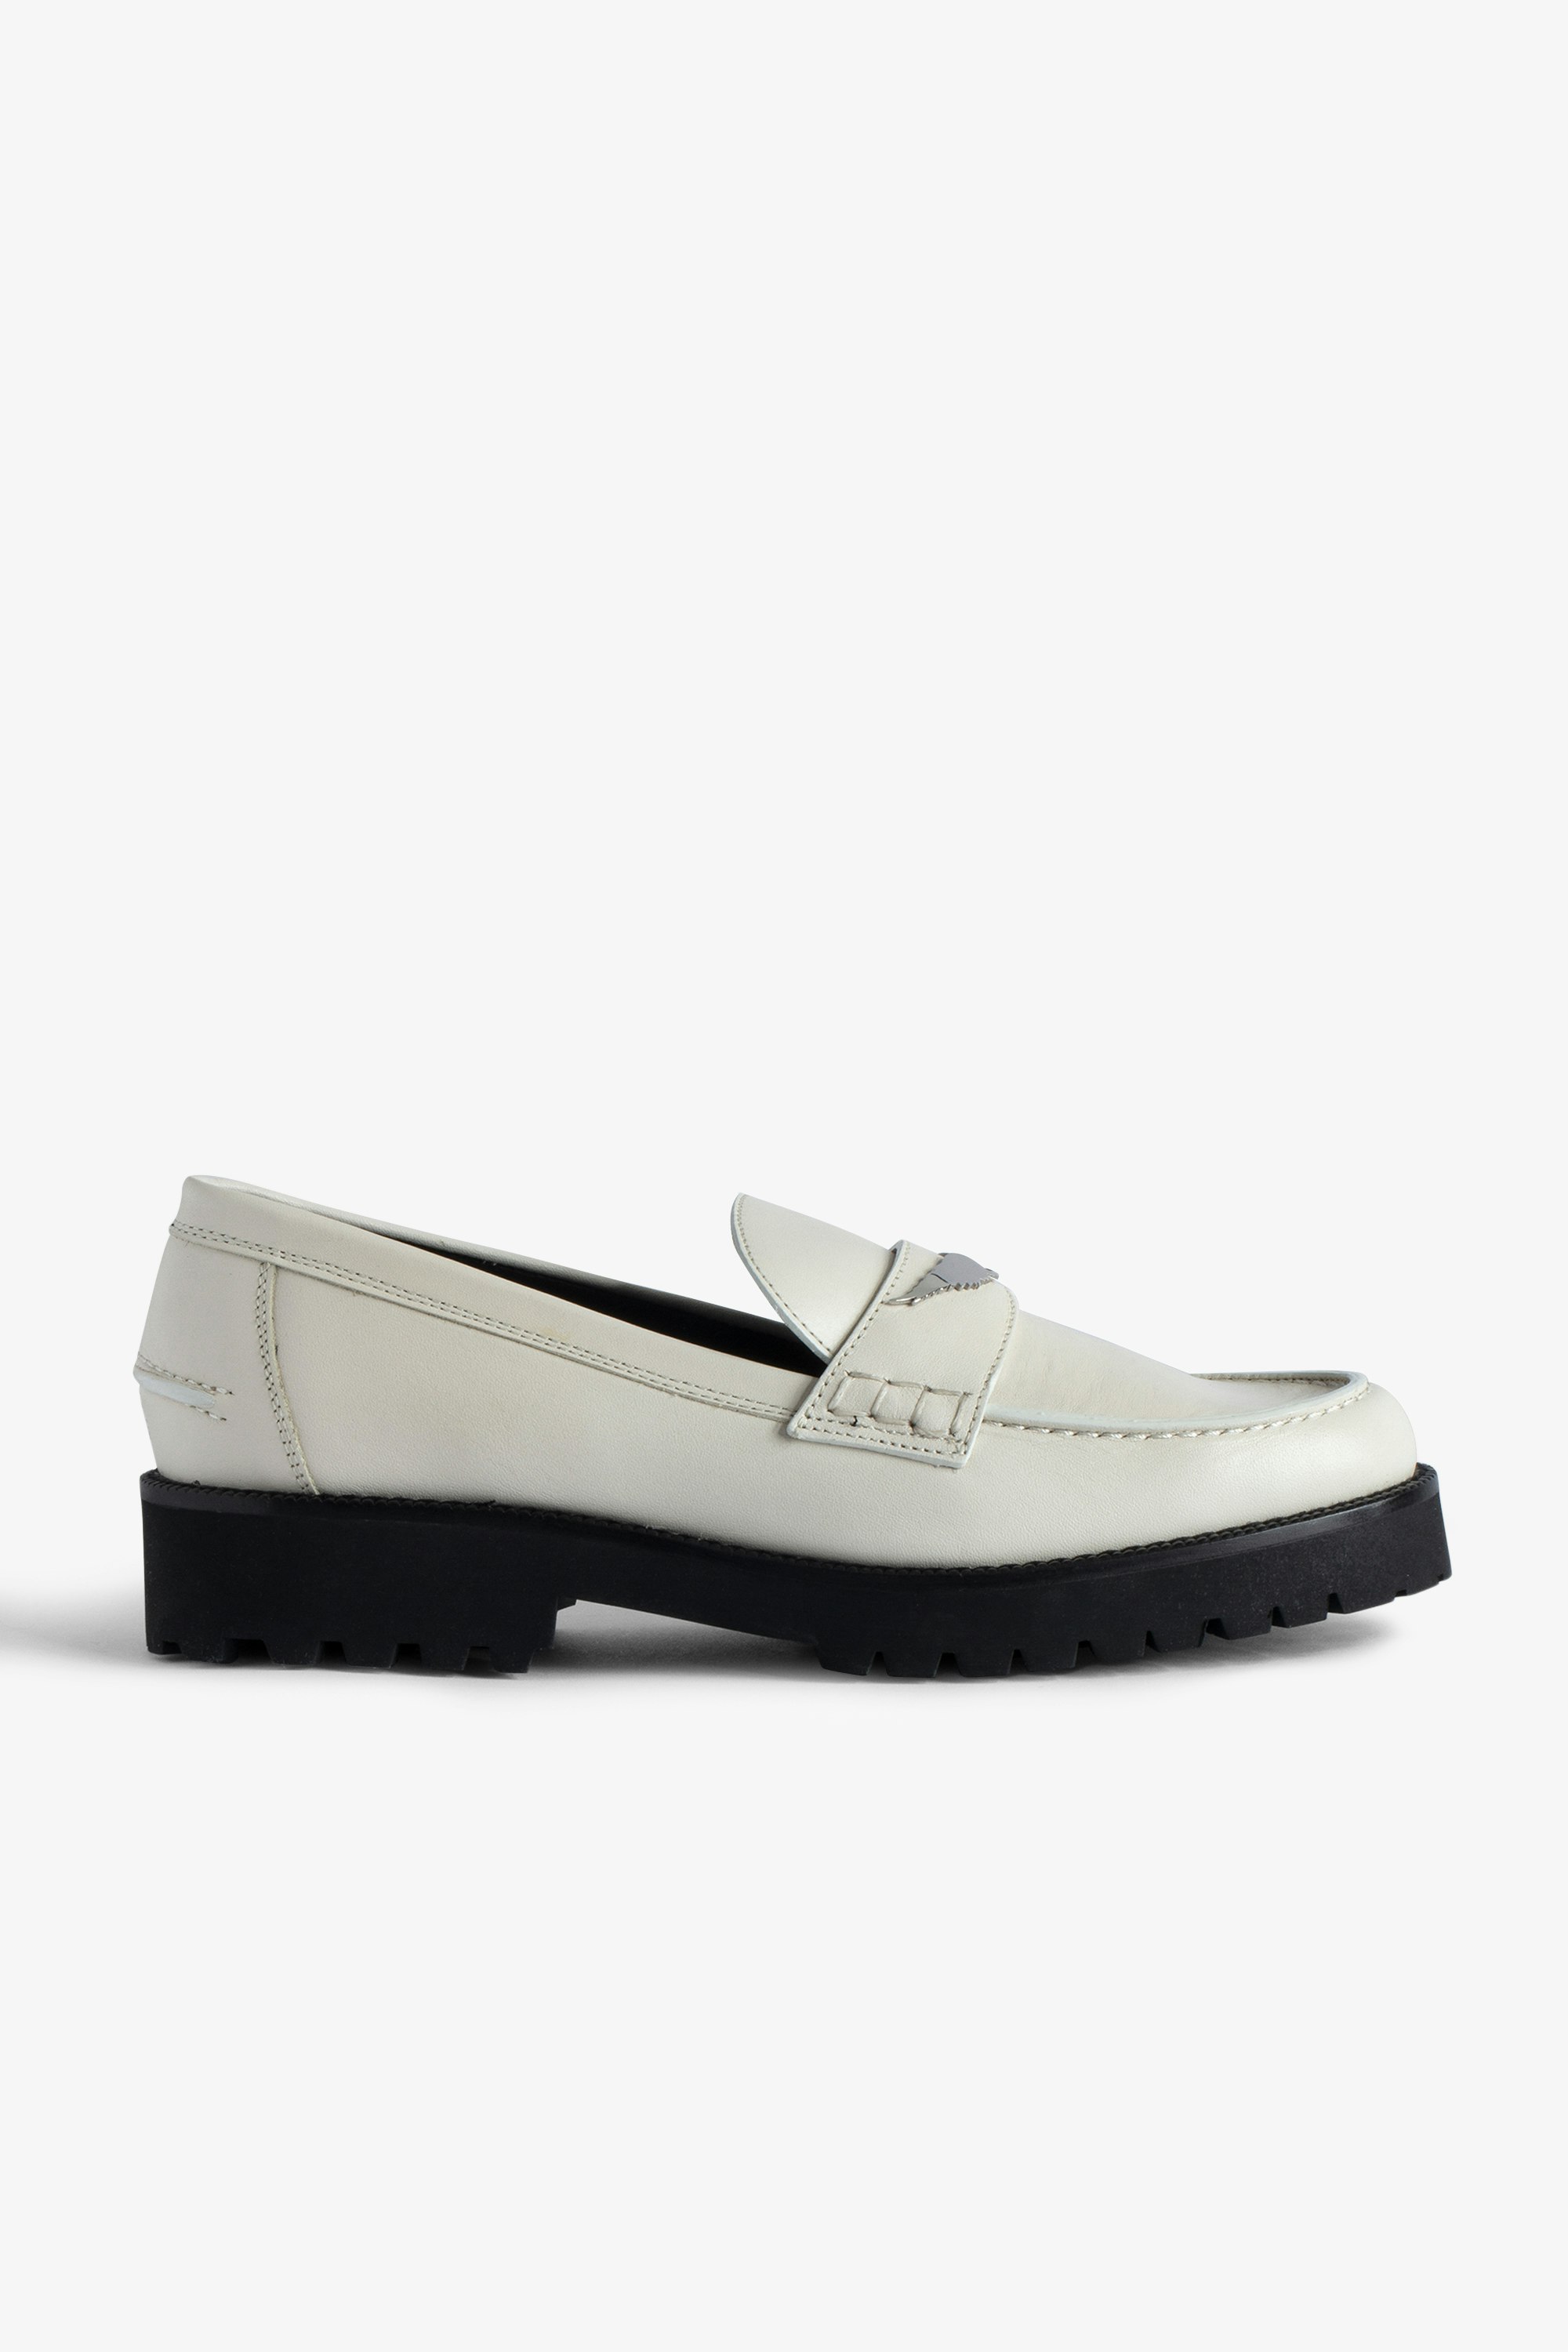 Joecassin Loafers - Women's semi-patent smooth leather loafers with wings charm.